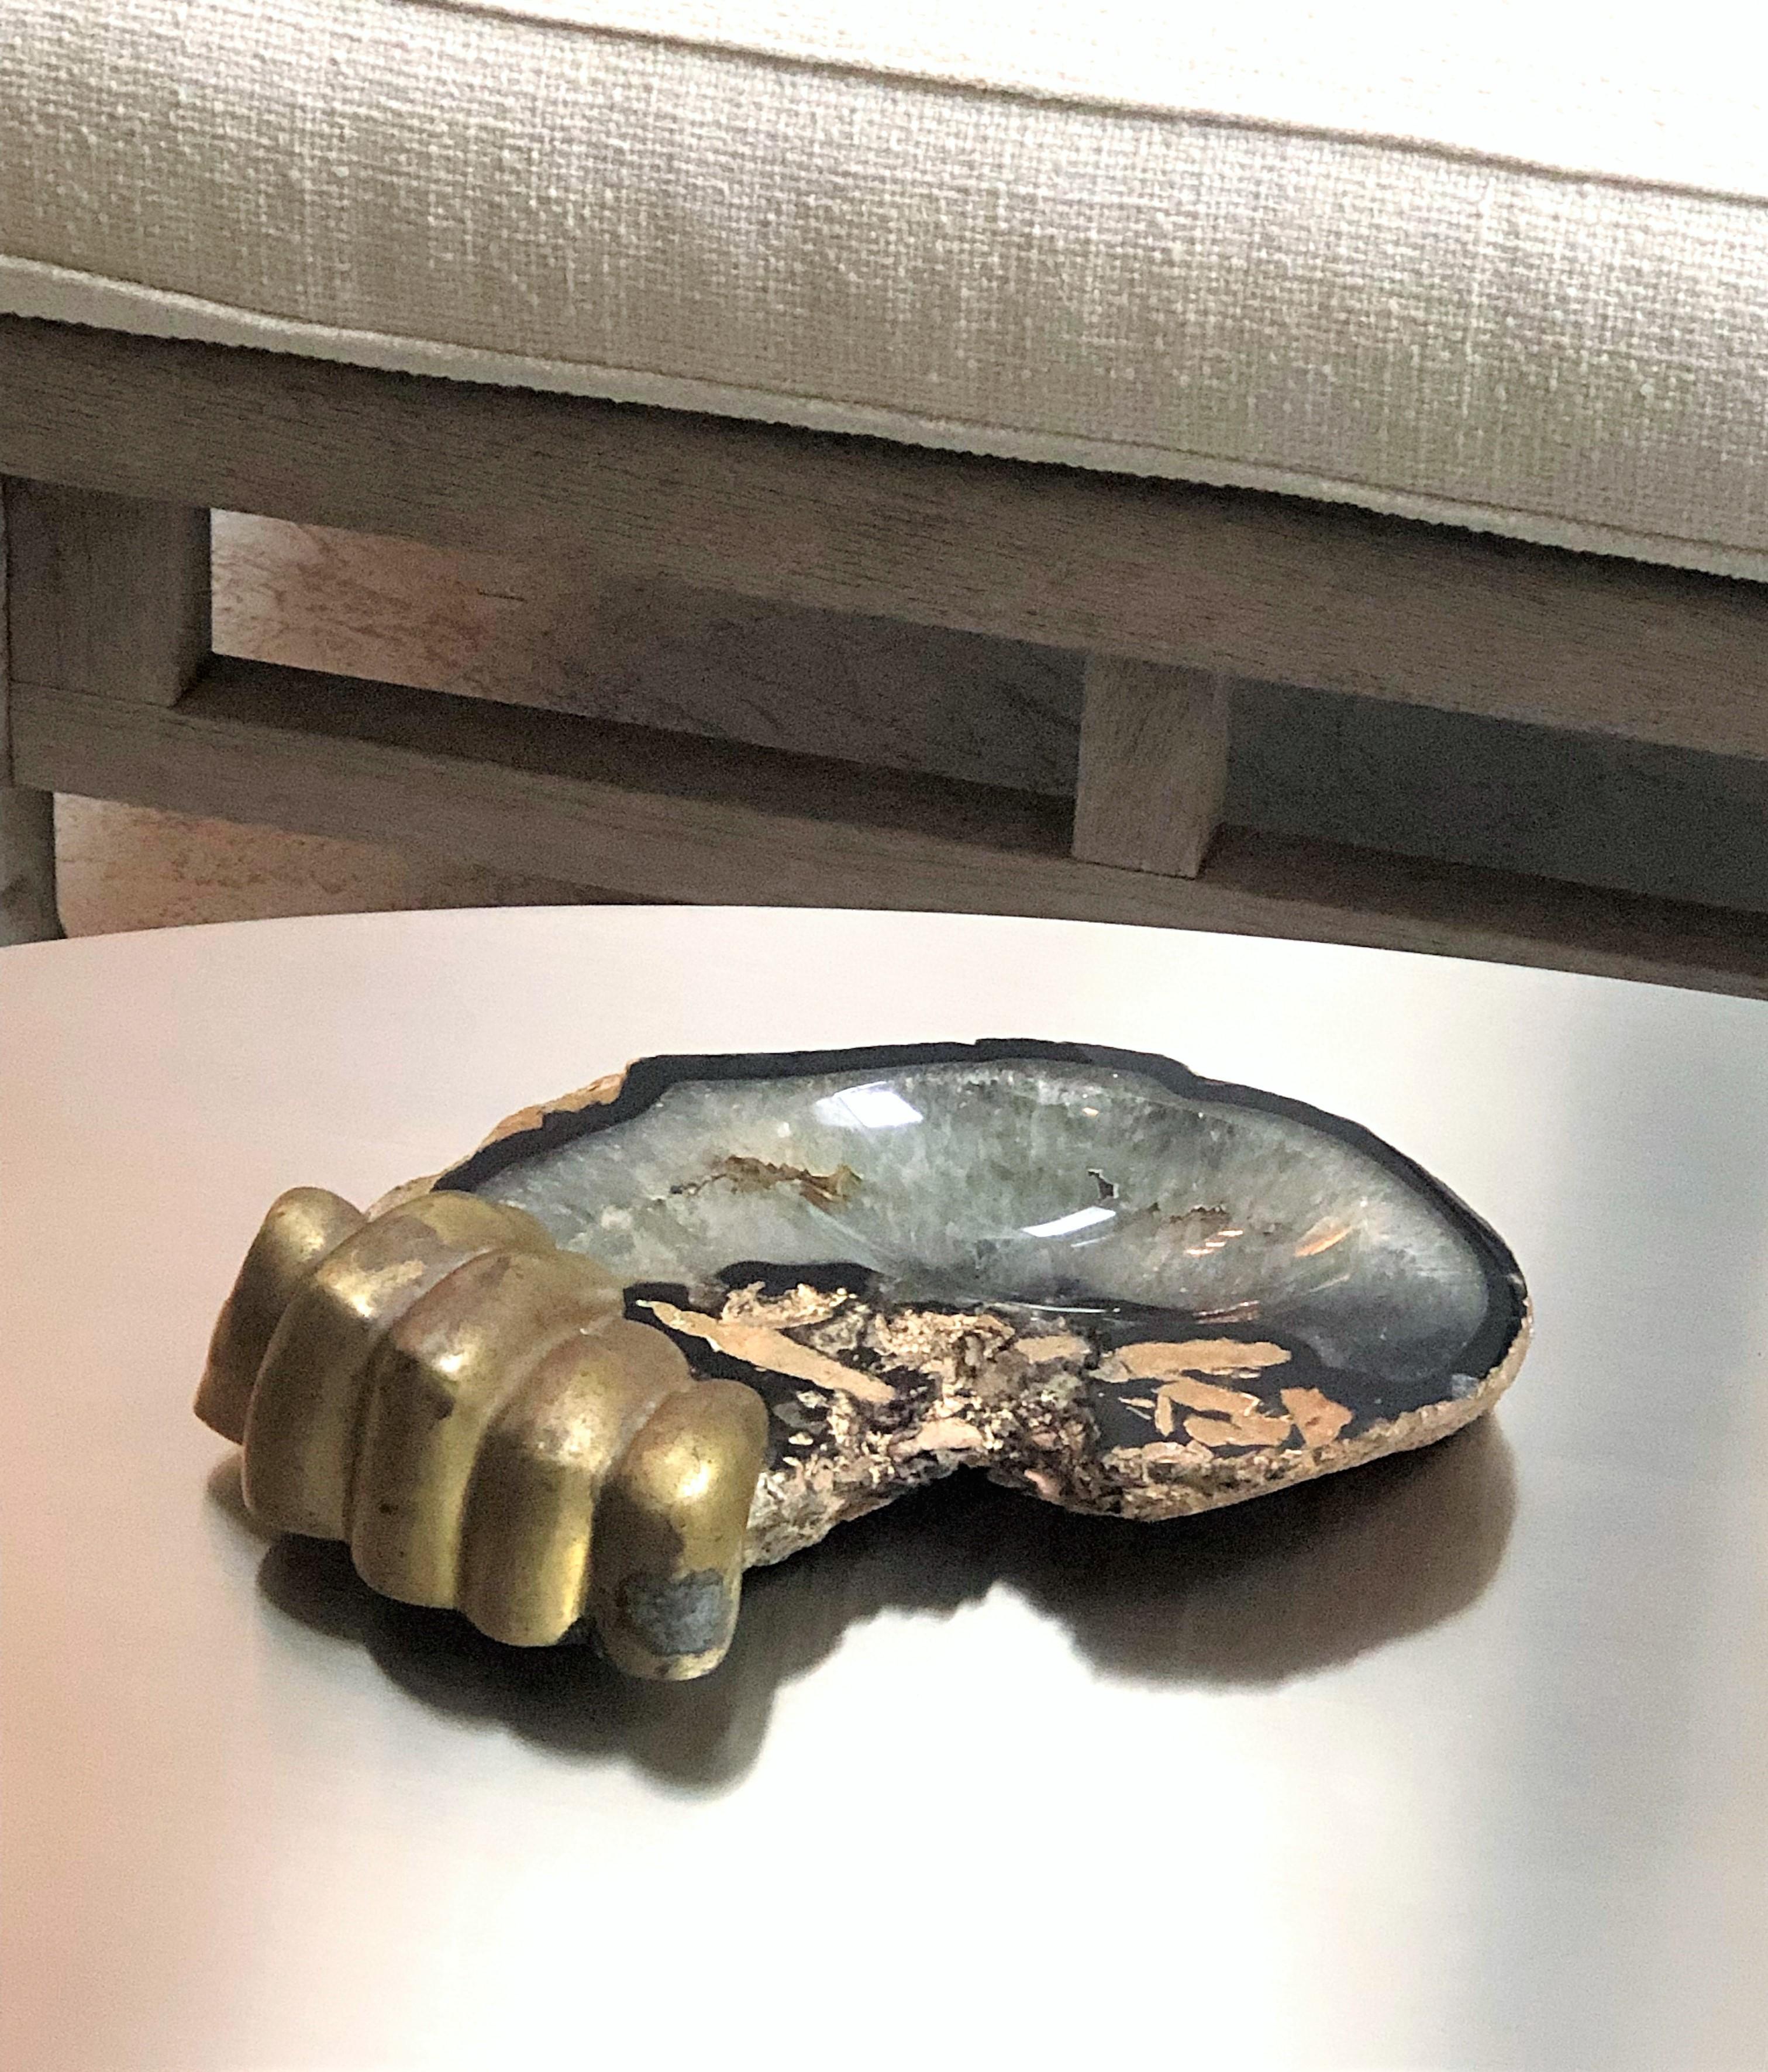 A rare vintage 1970s tray or bowl by artist Pietrina Checcacci. A larger than life-size bronze hand holds the freeform agate slab. Surrealist object by an outstanding artist.